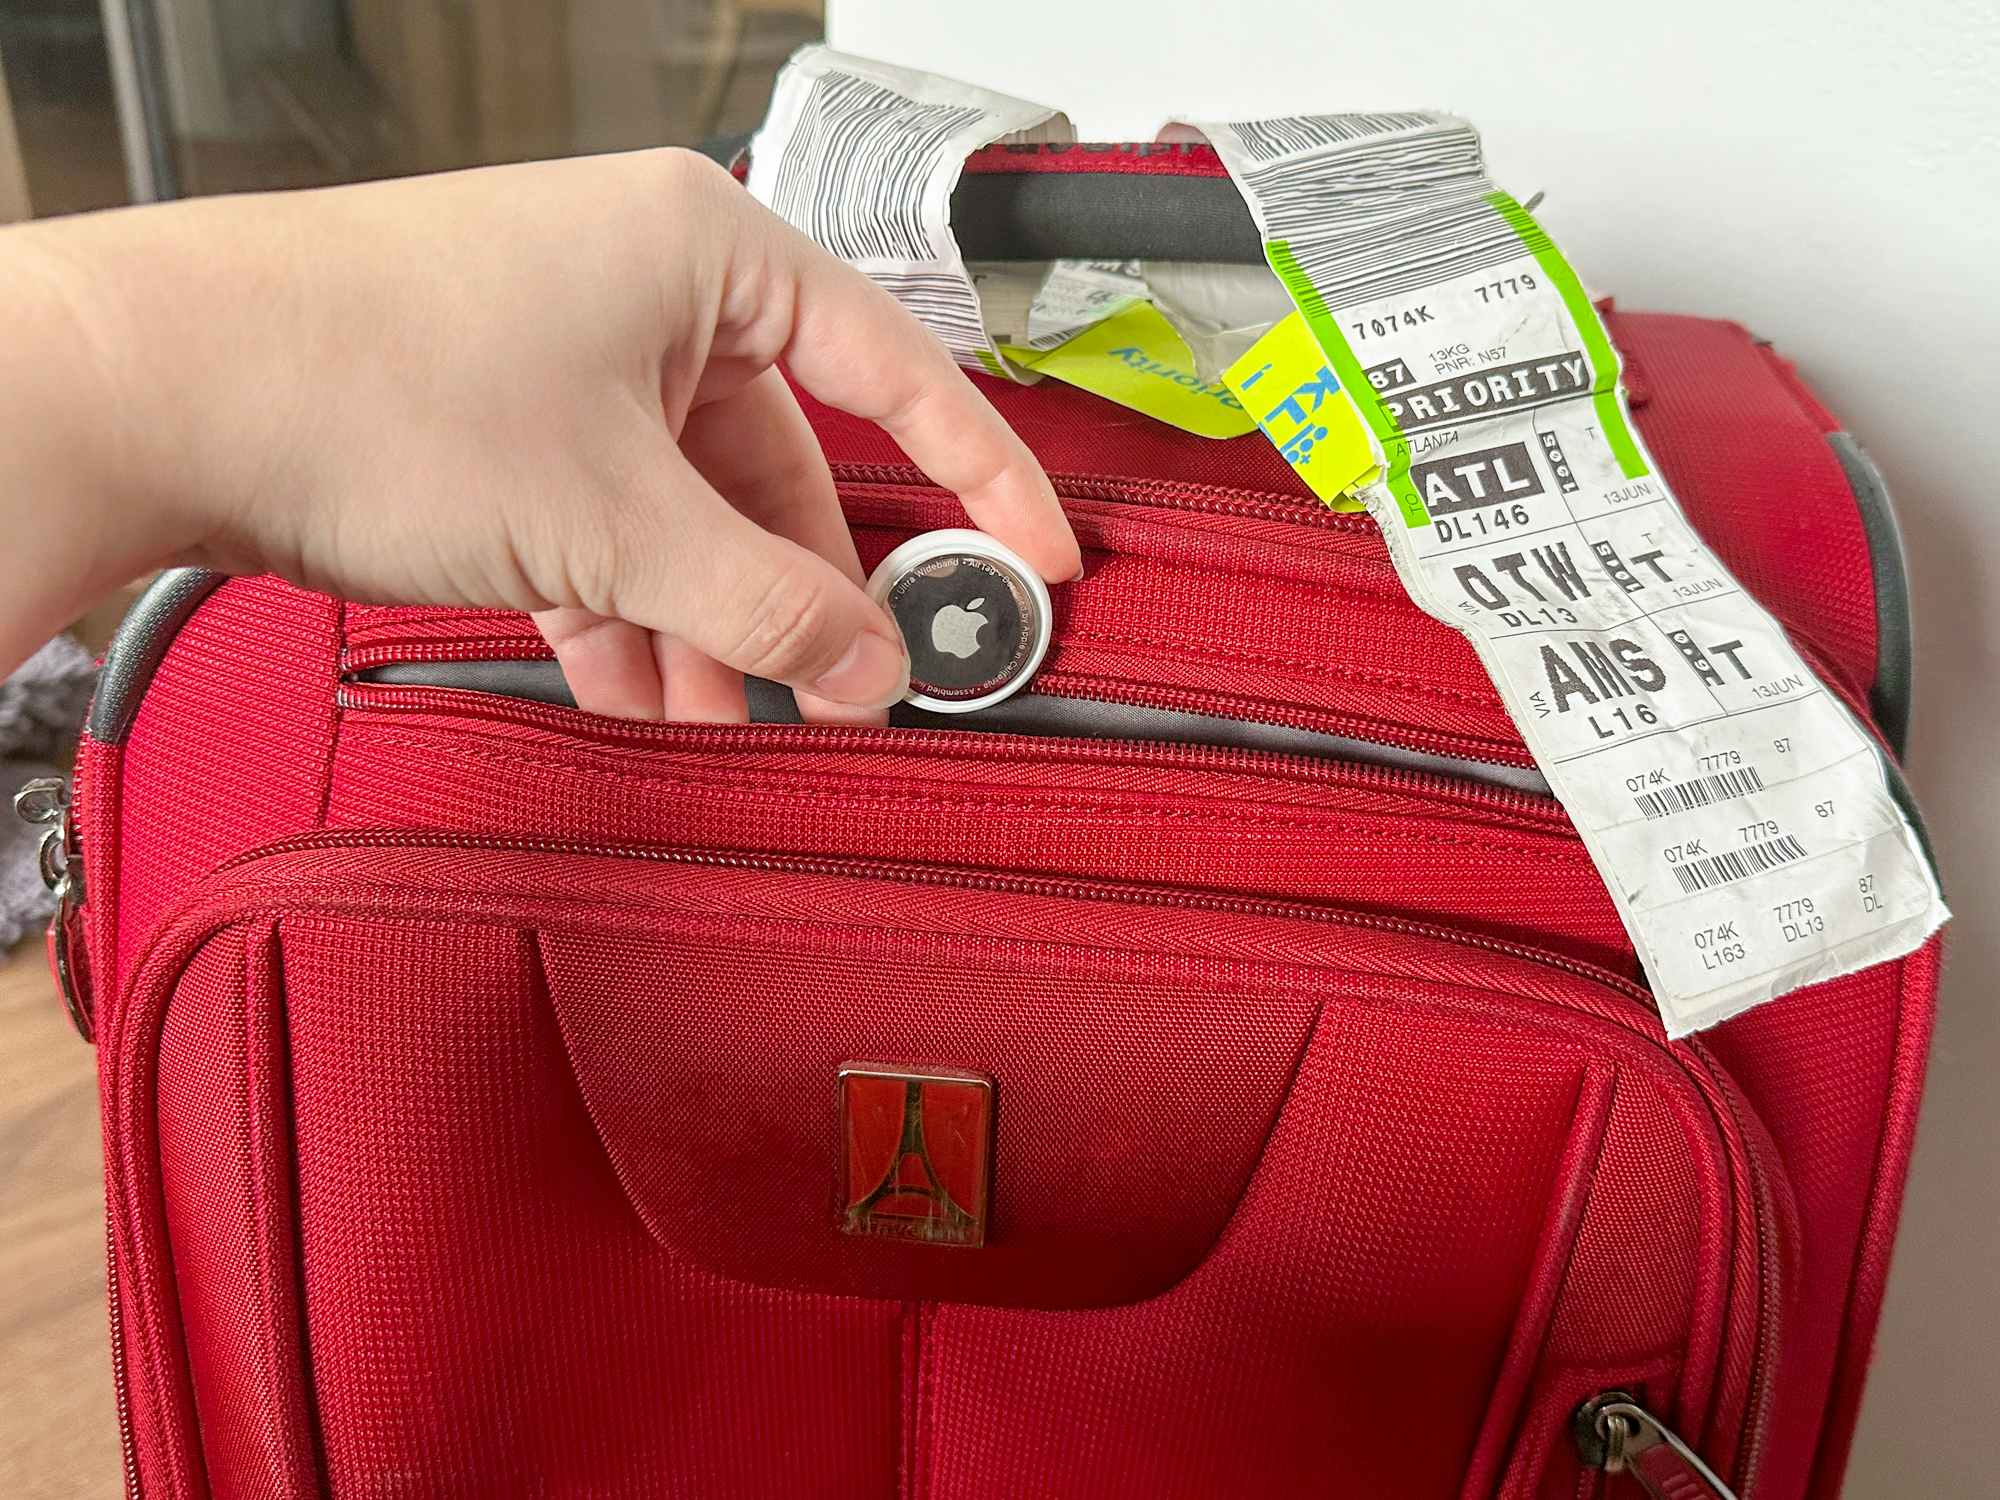 Someone putting an airtag into their suitcase to keep track of it